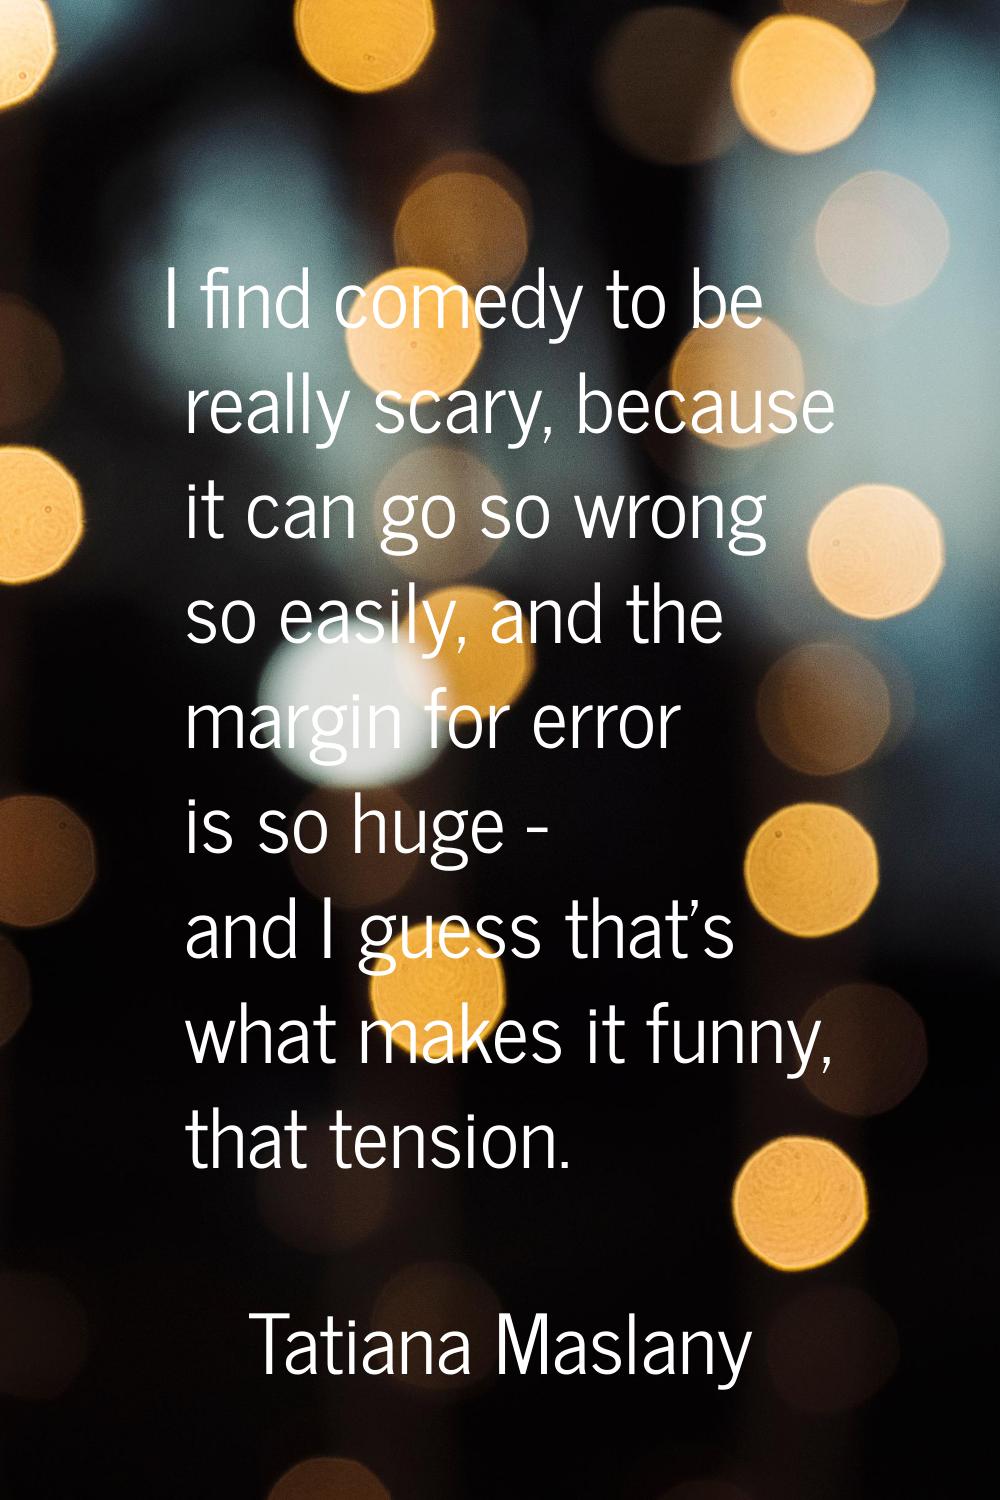 I find comedy to be really scary, because it can go so wrong so easily, and the margin for error is